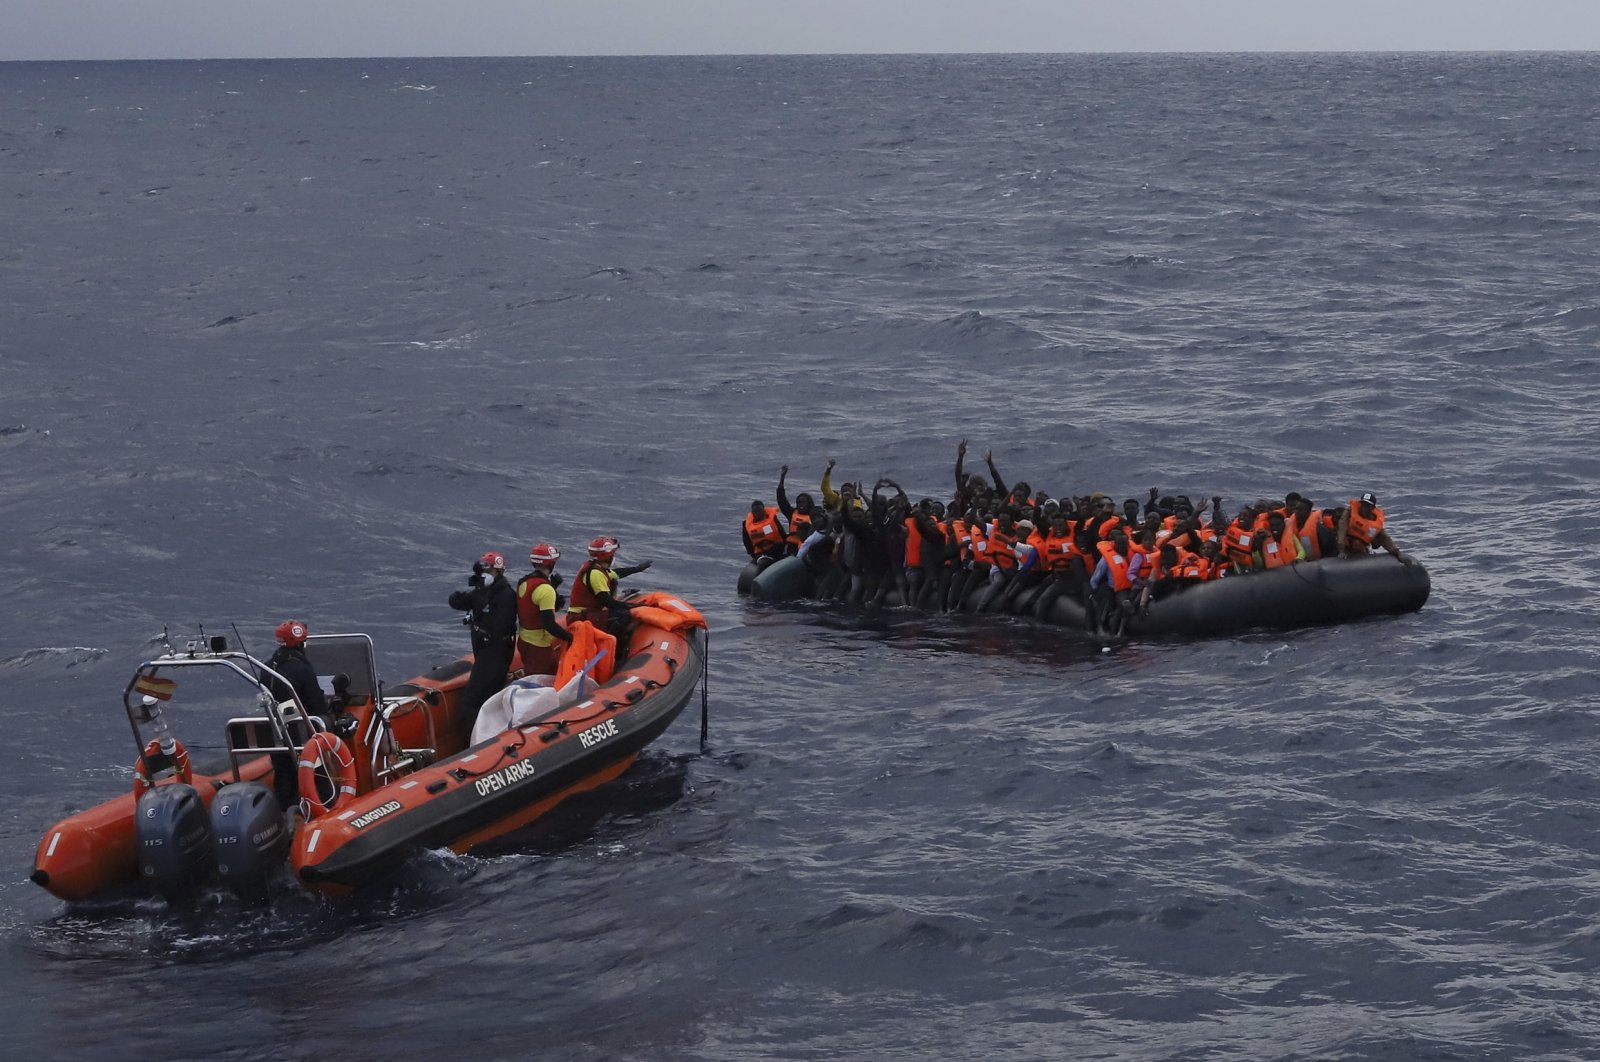 Refugees and migrants wait to be rescued by members of the Spanish NGO Proactiva Open Arms in the Mediterranean Sea, Nov. 11, 2020. (AP Photo)